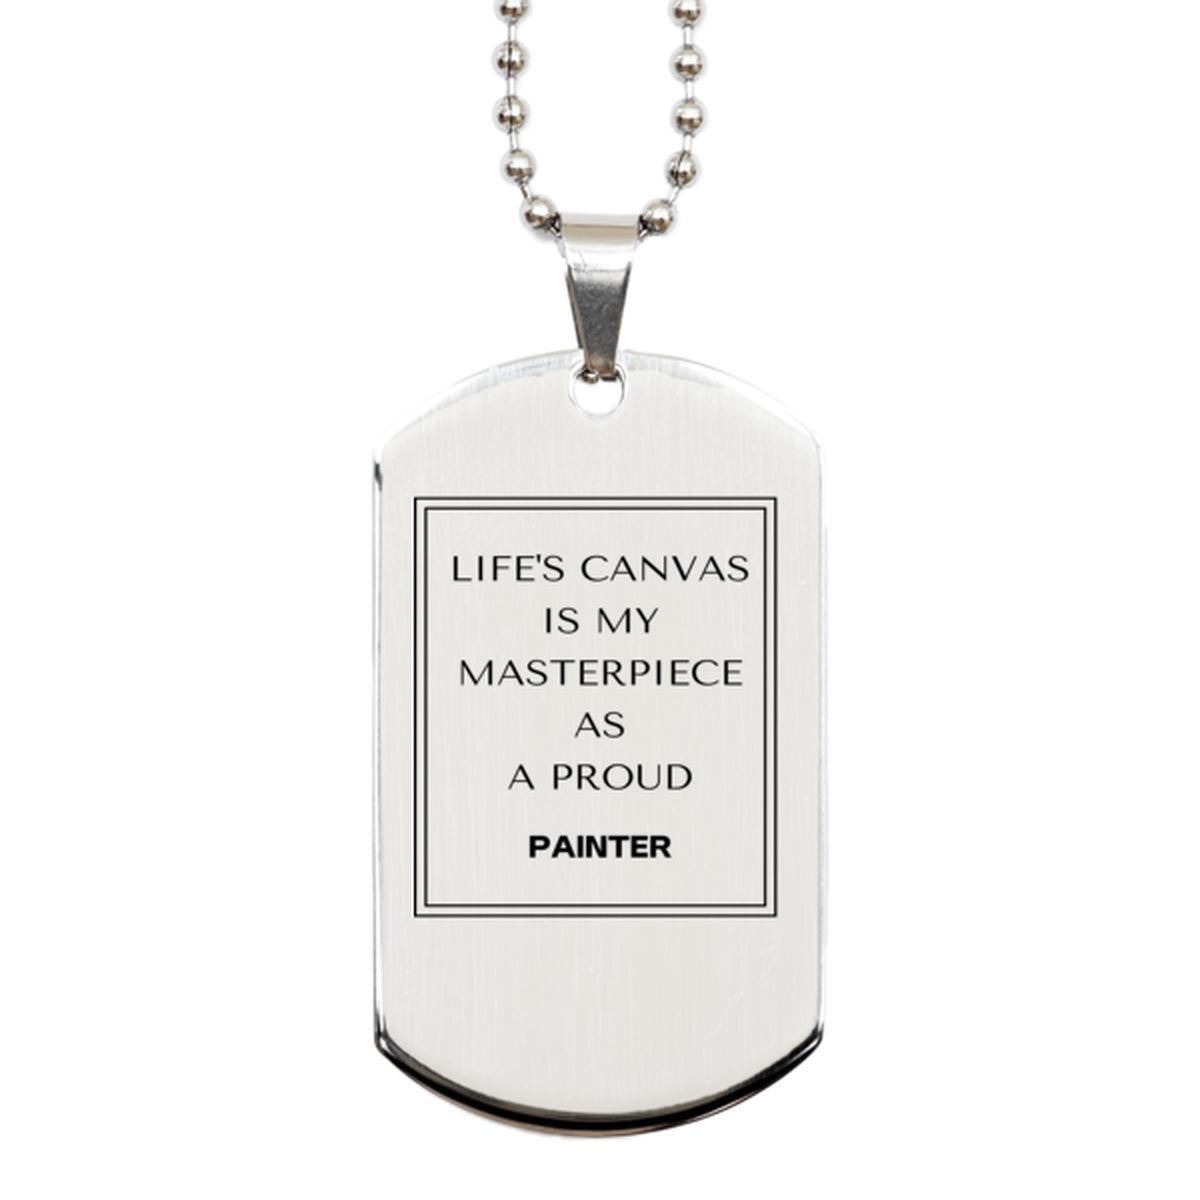 Proud Painter Gifts, Life's canvas is my masterpiece, Epic Birthday Christmas Unique Silver Dog Tag For Painter, Coworkers, Men, Women, Friends